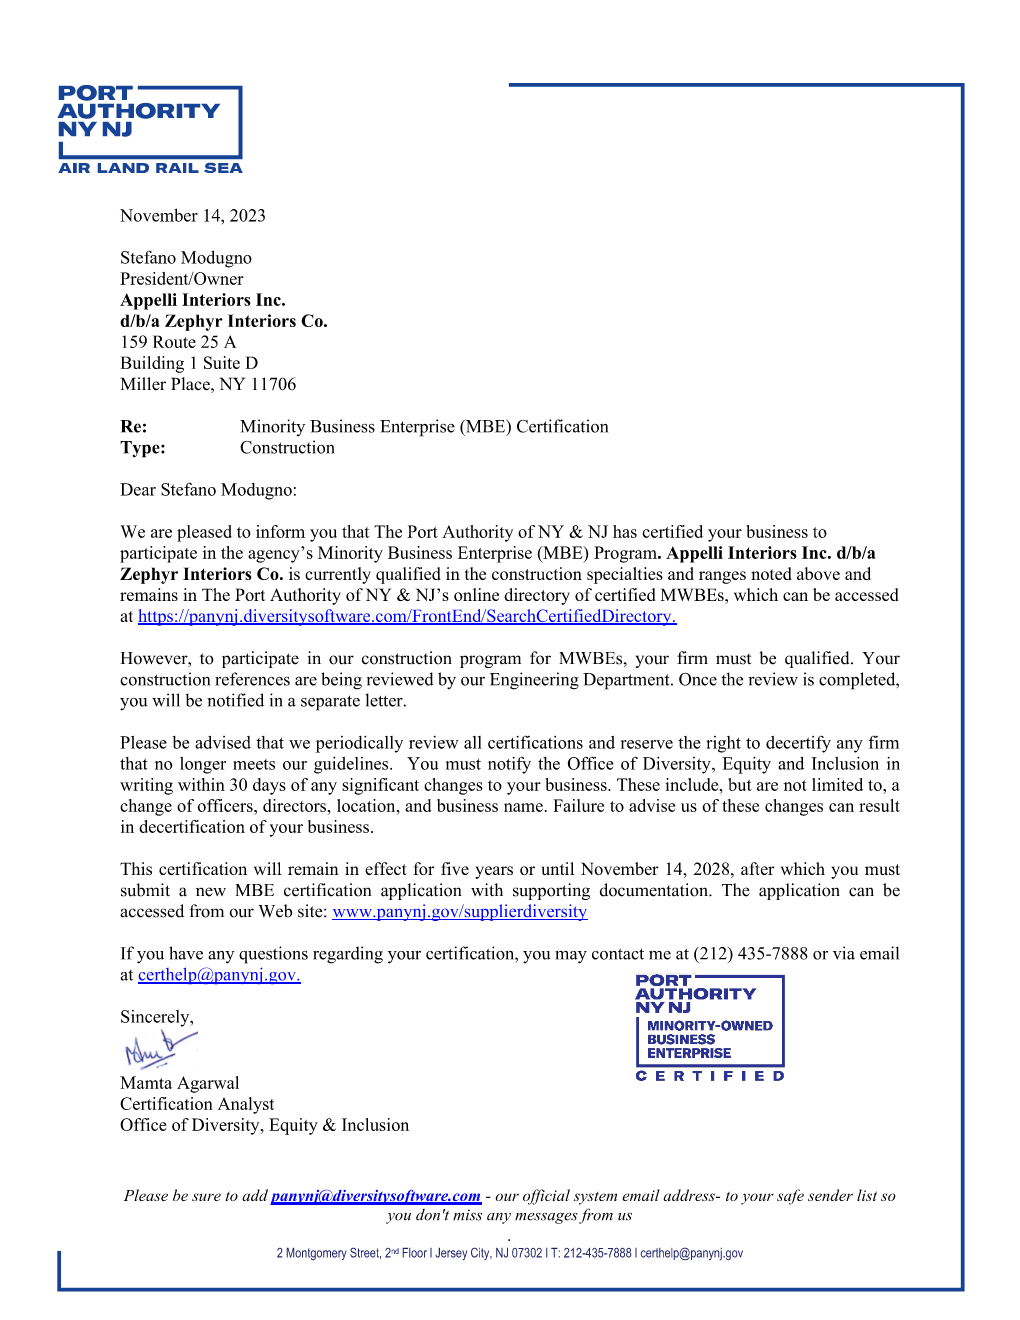 MBE Certification Letter Port Authority NY NJ.png